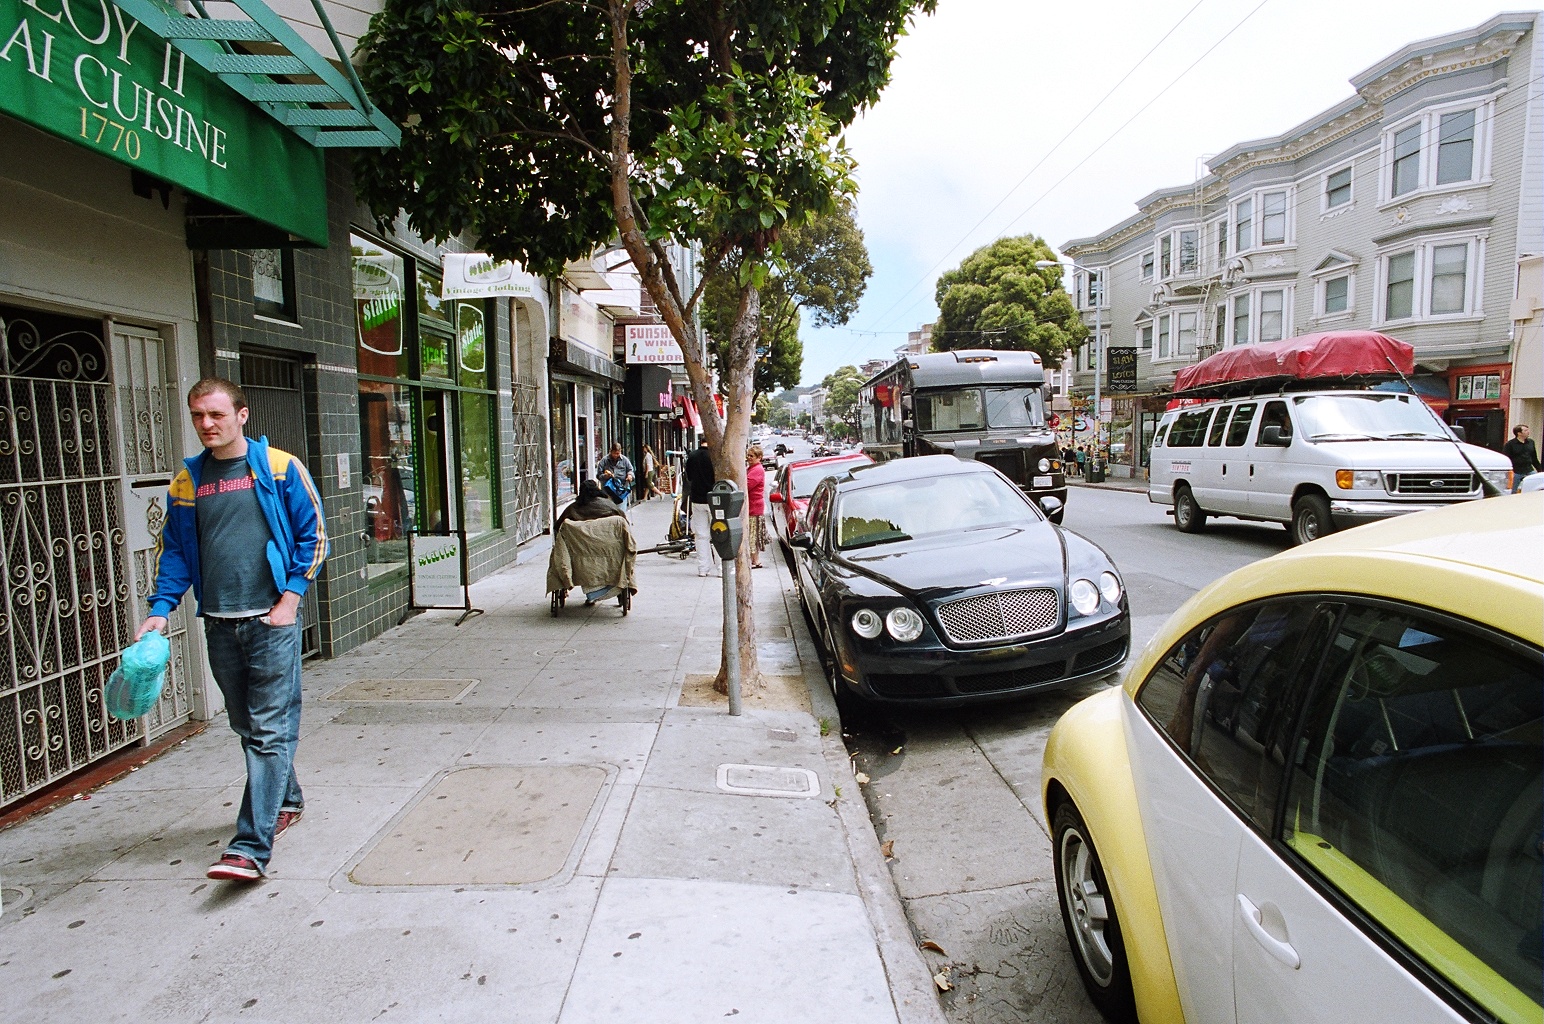 [The+Bentley,+The+Beetle+and+the+Dude,+Haight+Ashbury+Distric,+San+Francisco+CA,+2007.JPG]